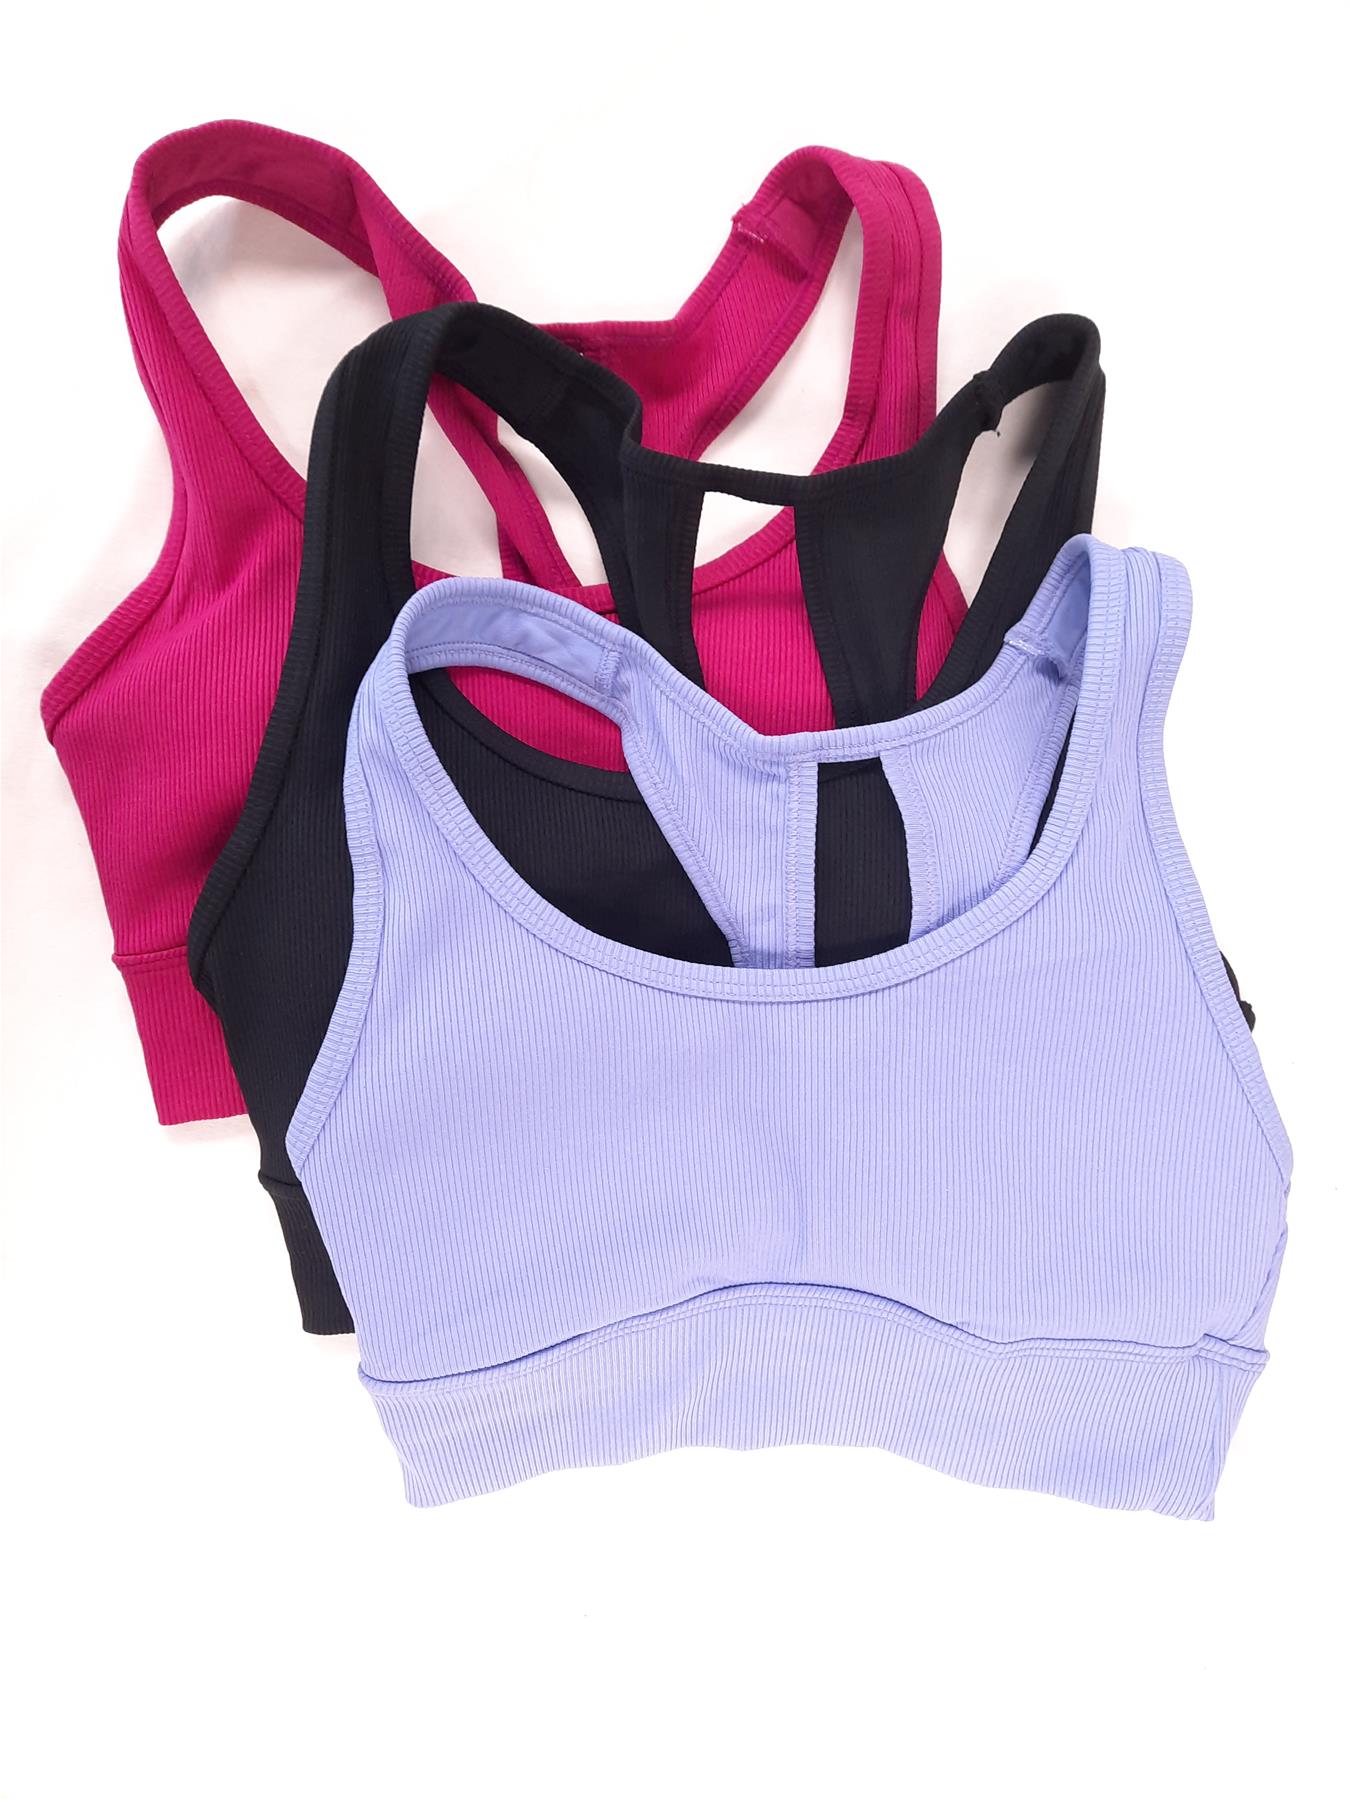 Yoga Top Sports Bra Crop Top Freely Academy Non-Wired Removable Padding Ribbed